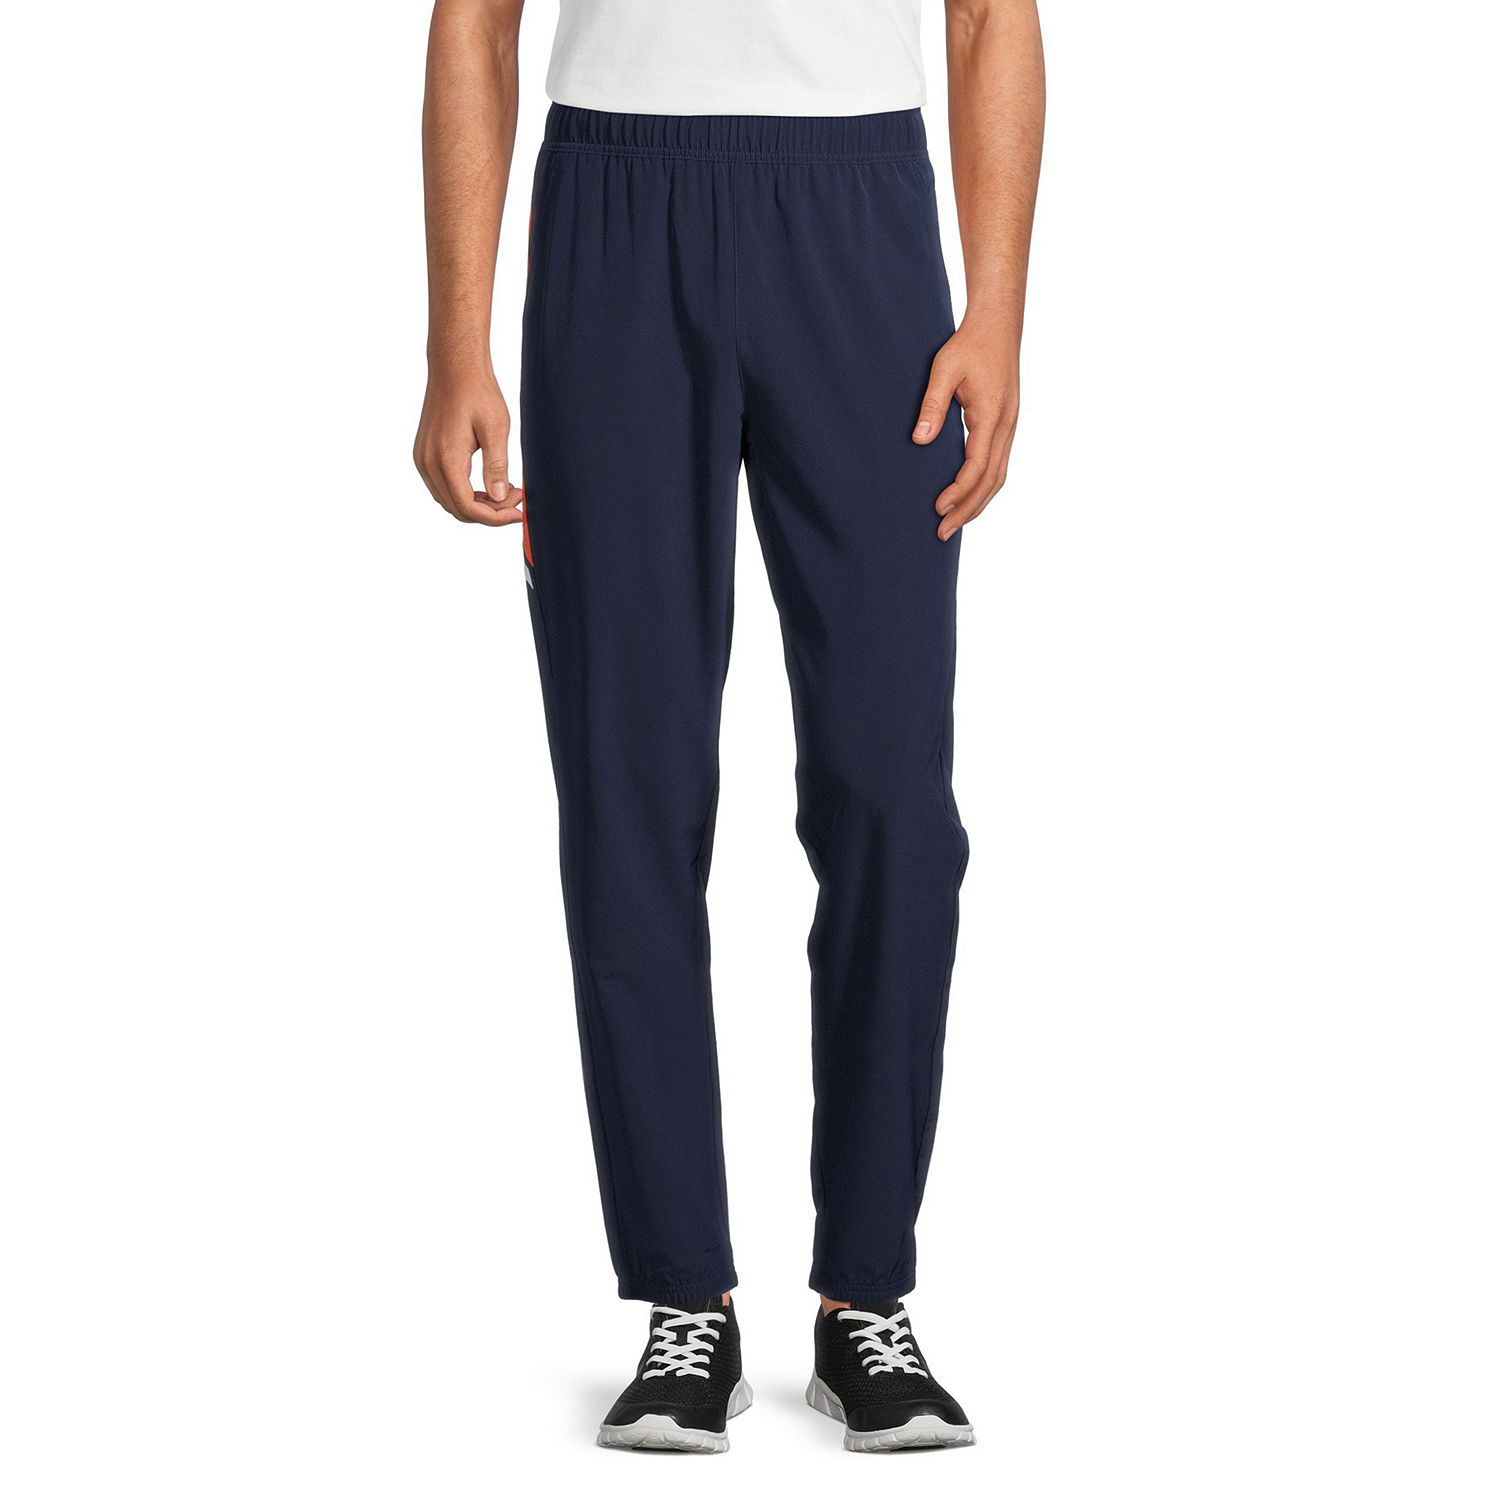 Xersion Mens Moisture Wicking Workout Pant - JCPenney